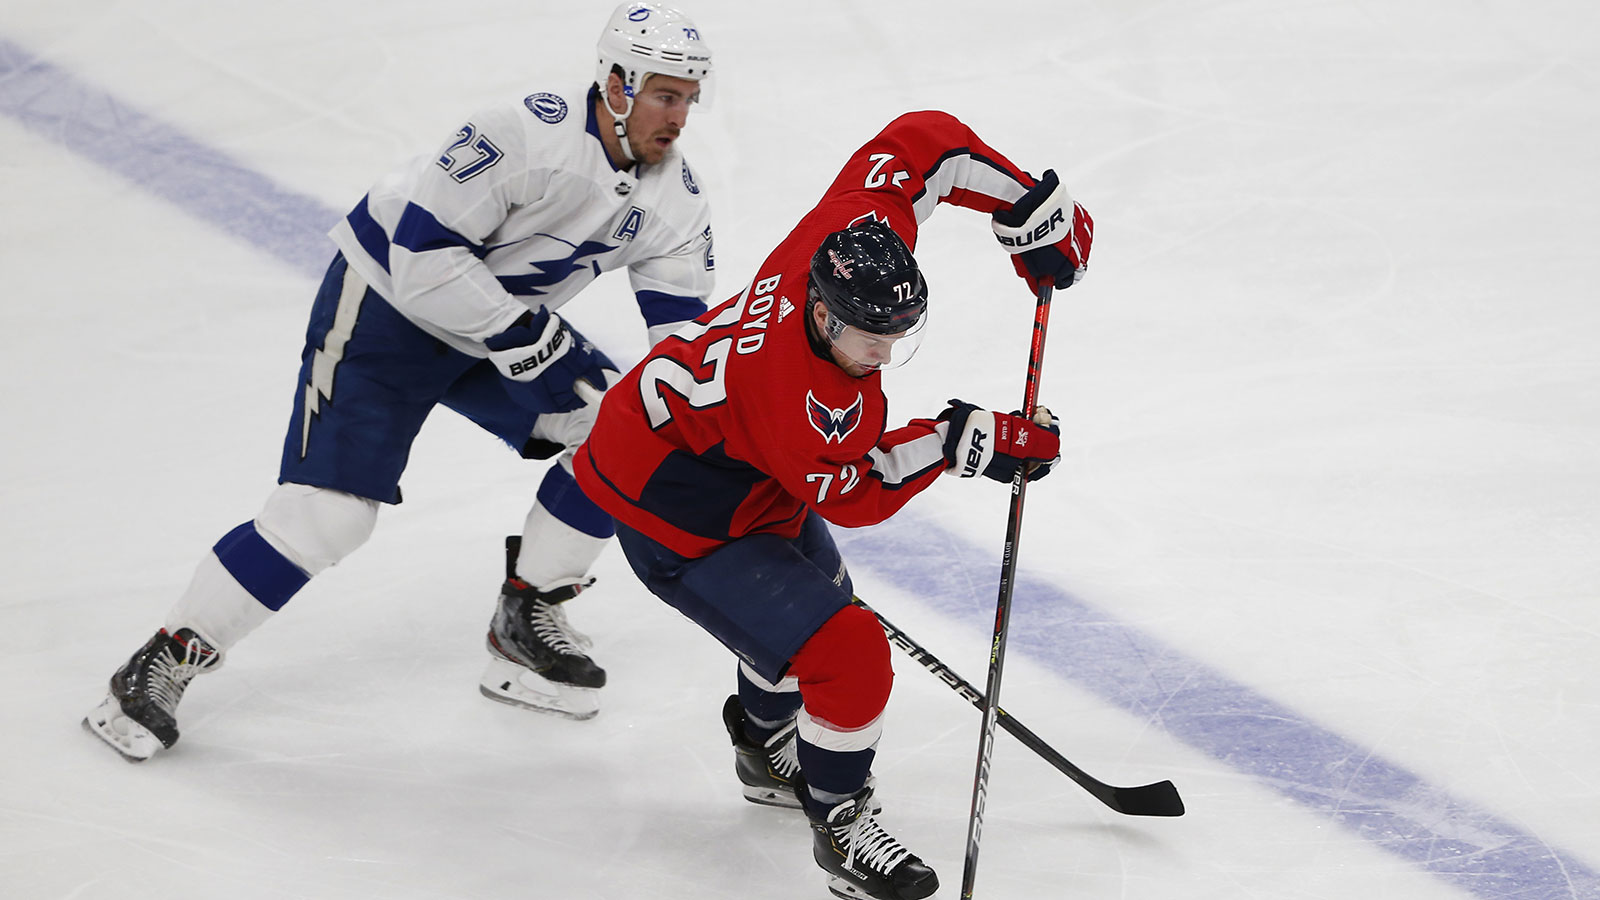 Lightning slip up in 3rd period, fall in overtime to Capitals